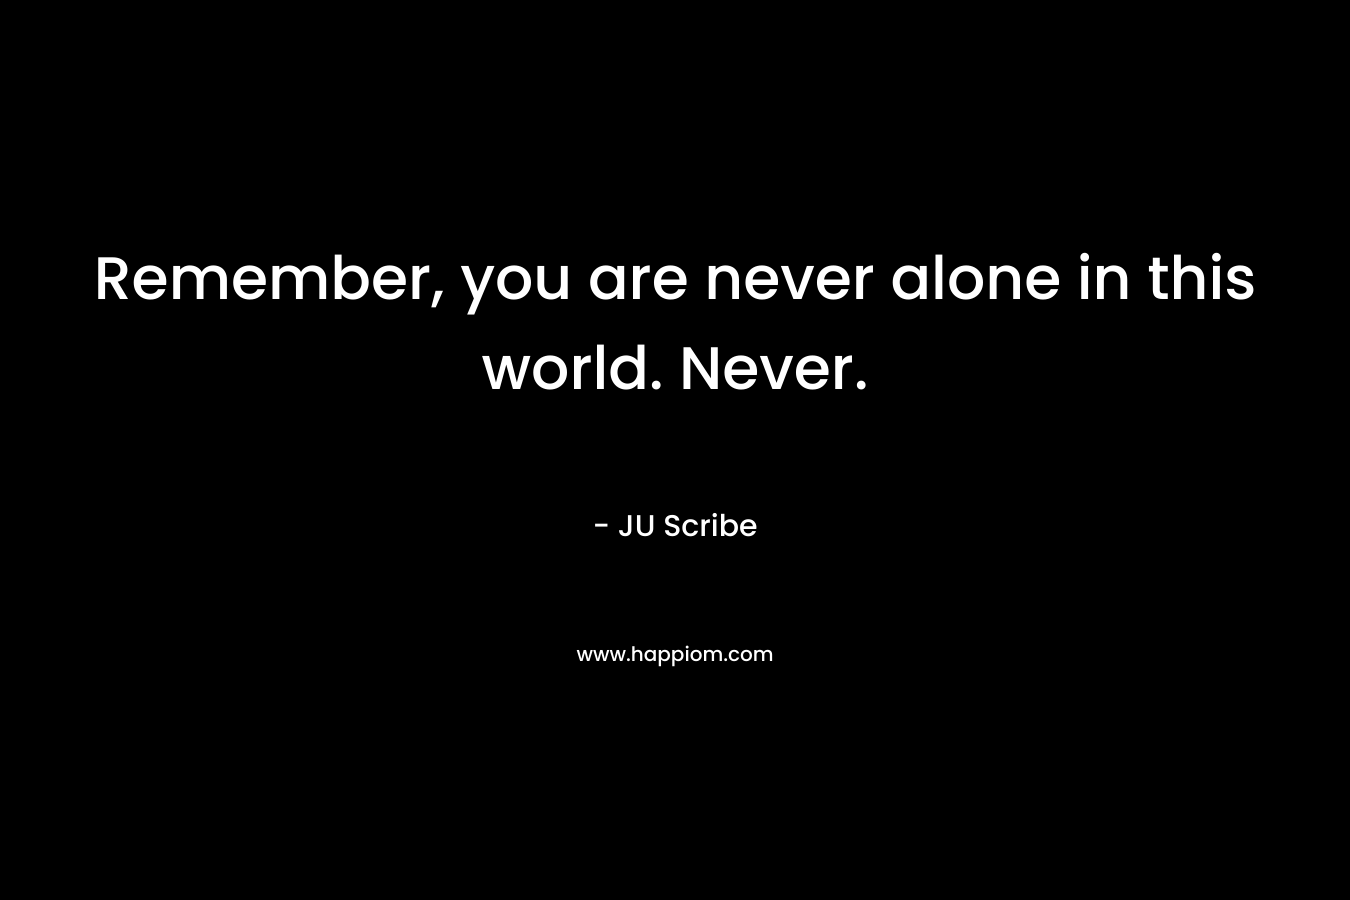 Remember, you are never alone in this world. Never.